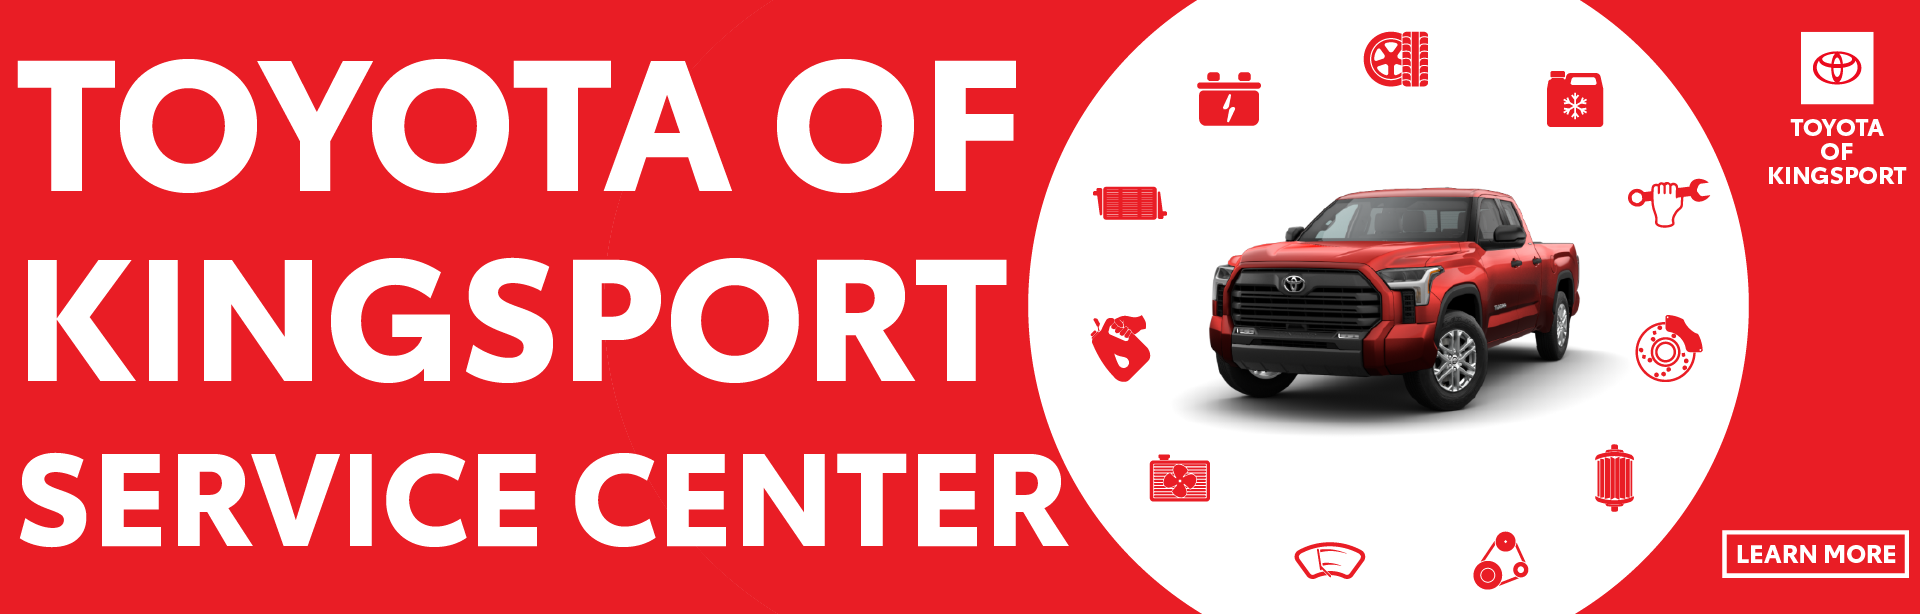 Toyota of Kingsport Service Center